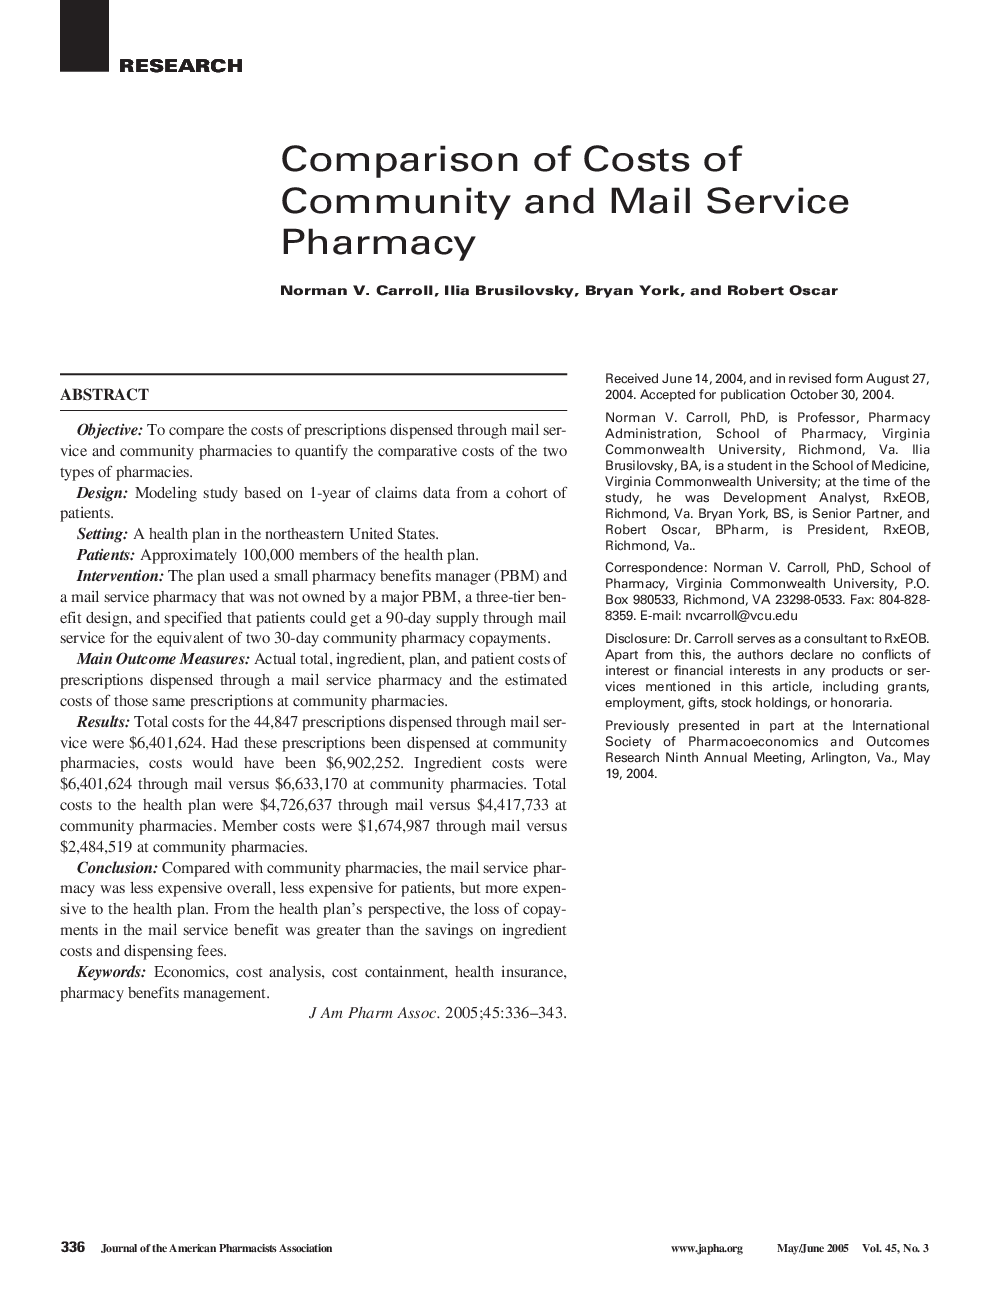 Comparison of Costs of Community and Mail Service Pharmacy